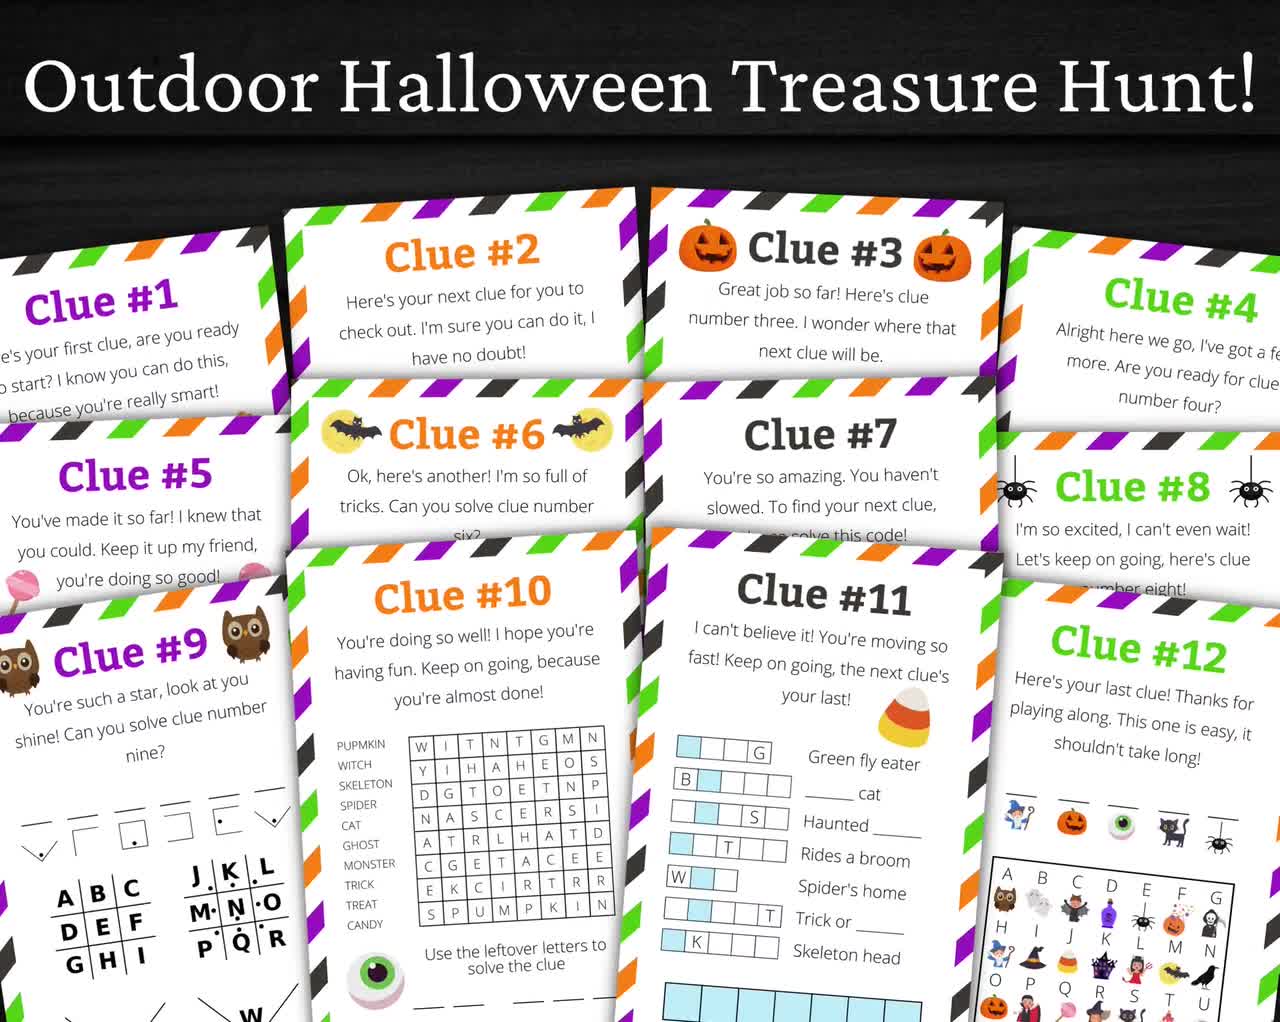 Outdoor Halloween Treasure Hunt For Older Kids | Halloween Scavenger Hunt |  Halloween Activity for Kids and Teens | Games and Puzzles